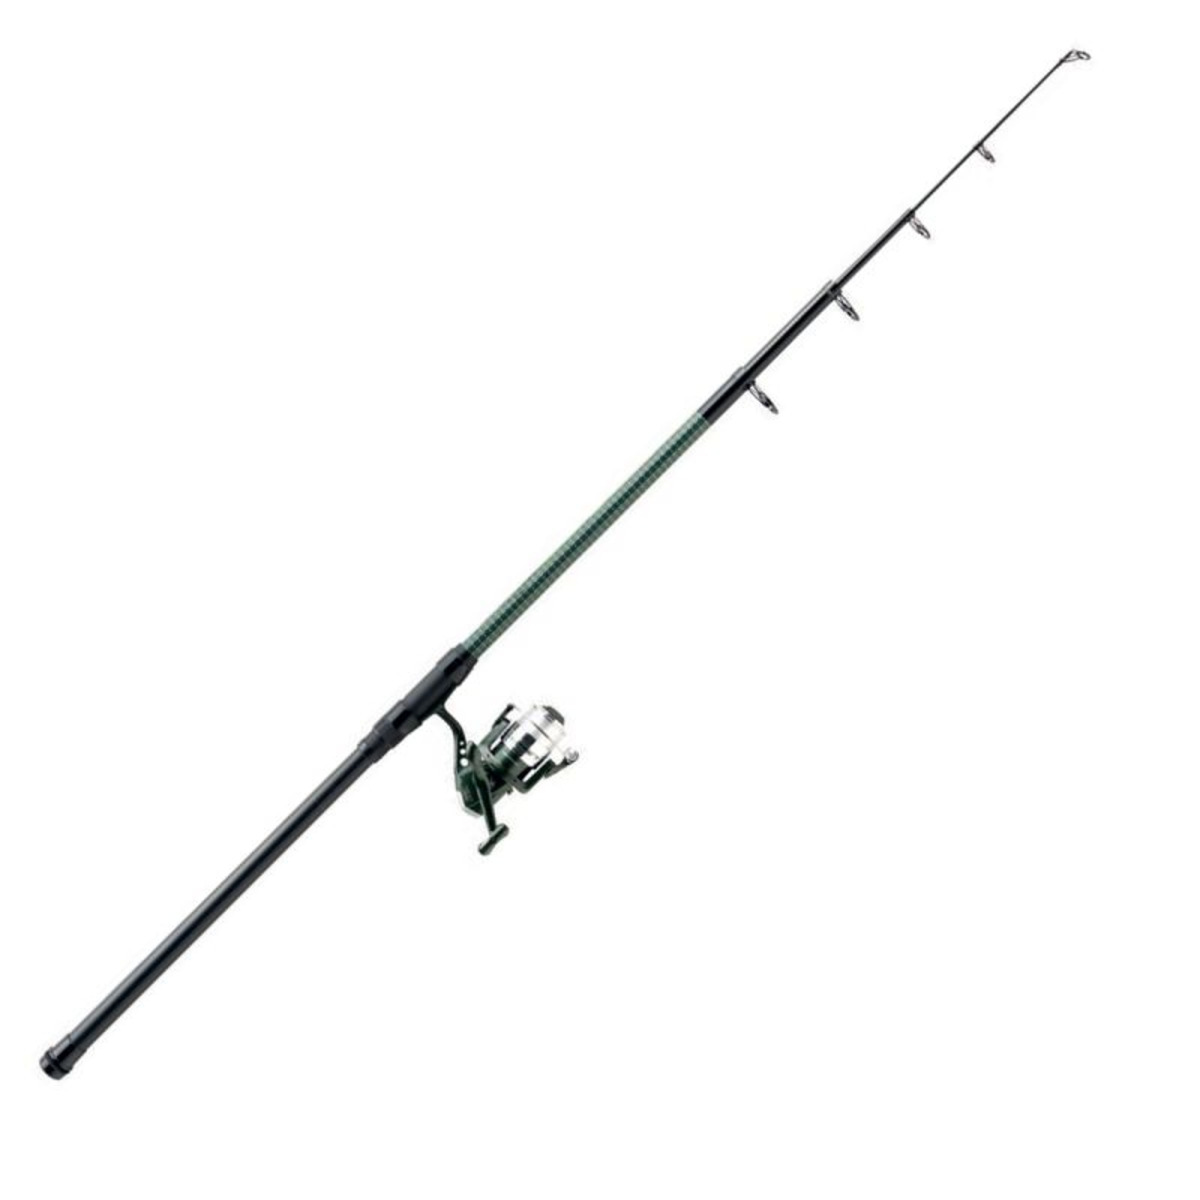 Mitchell GT Pro Strong - 3.50 m - 80-150 g - Reel 4000 FD